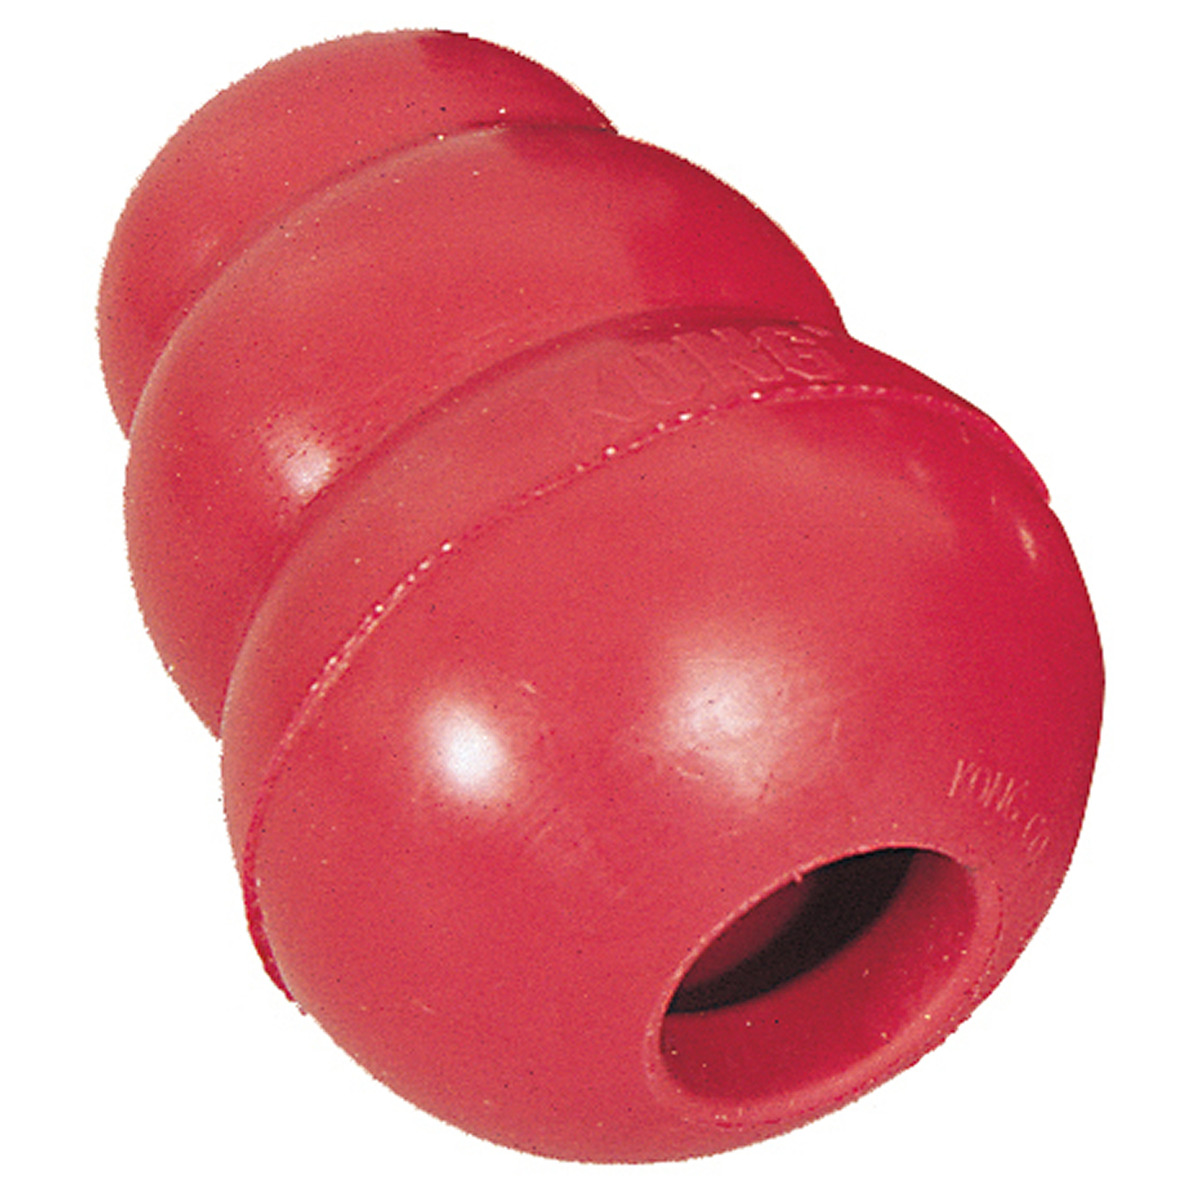 red dog toy